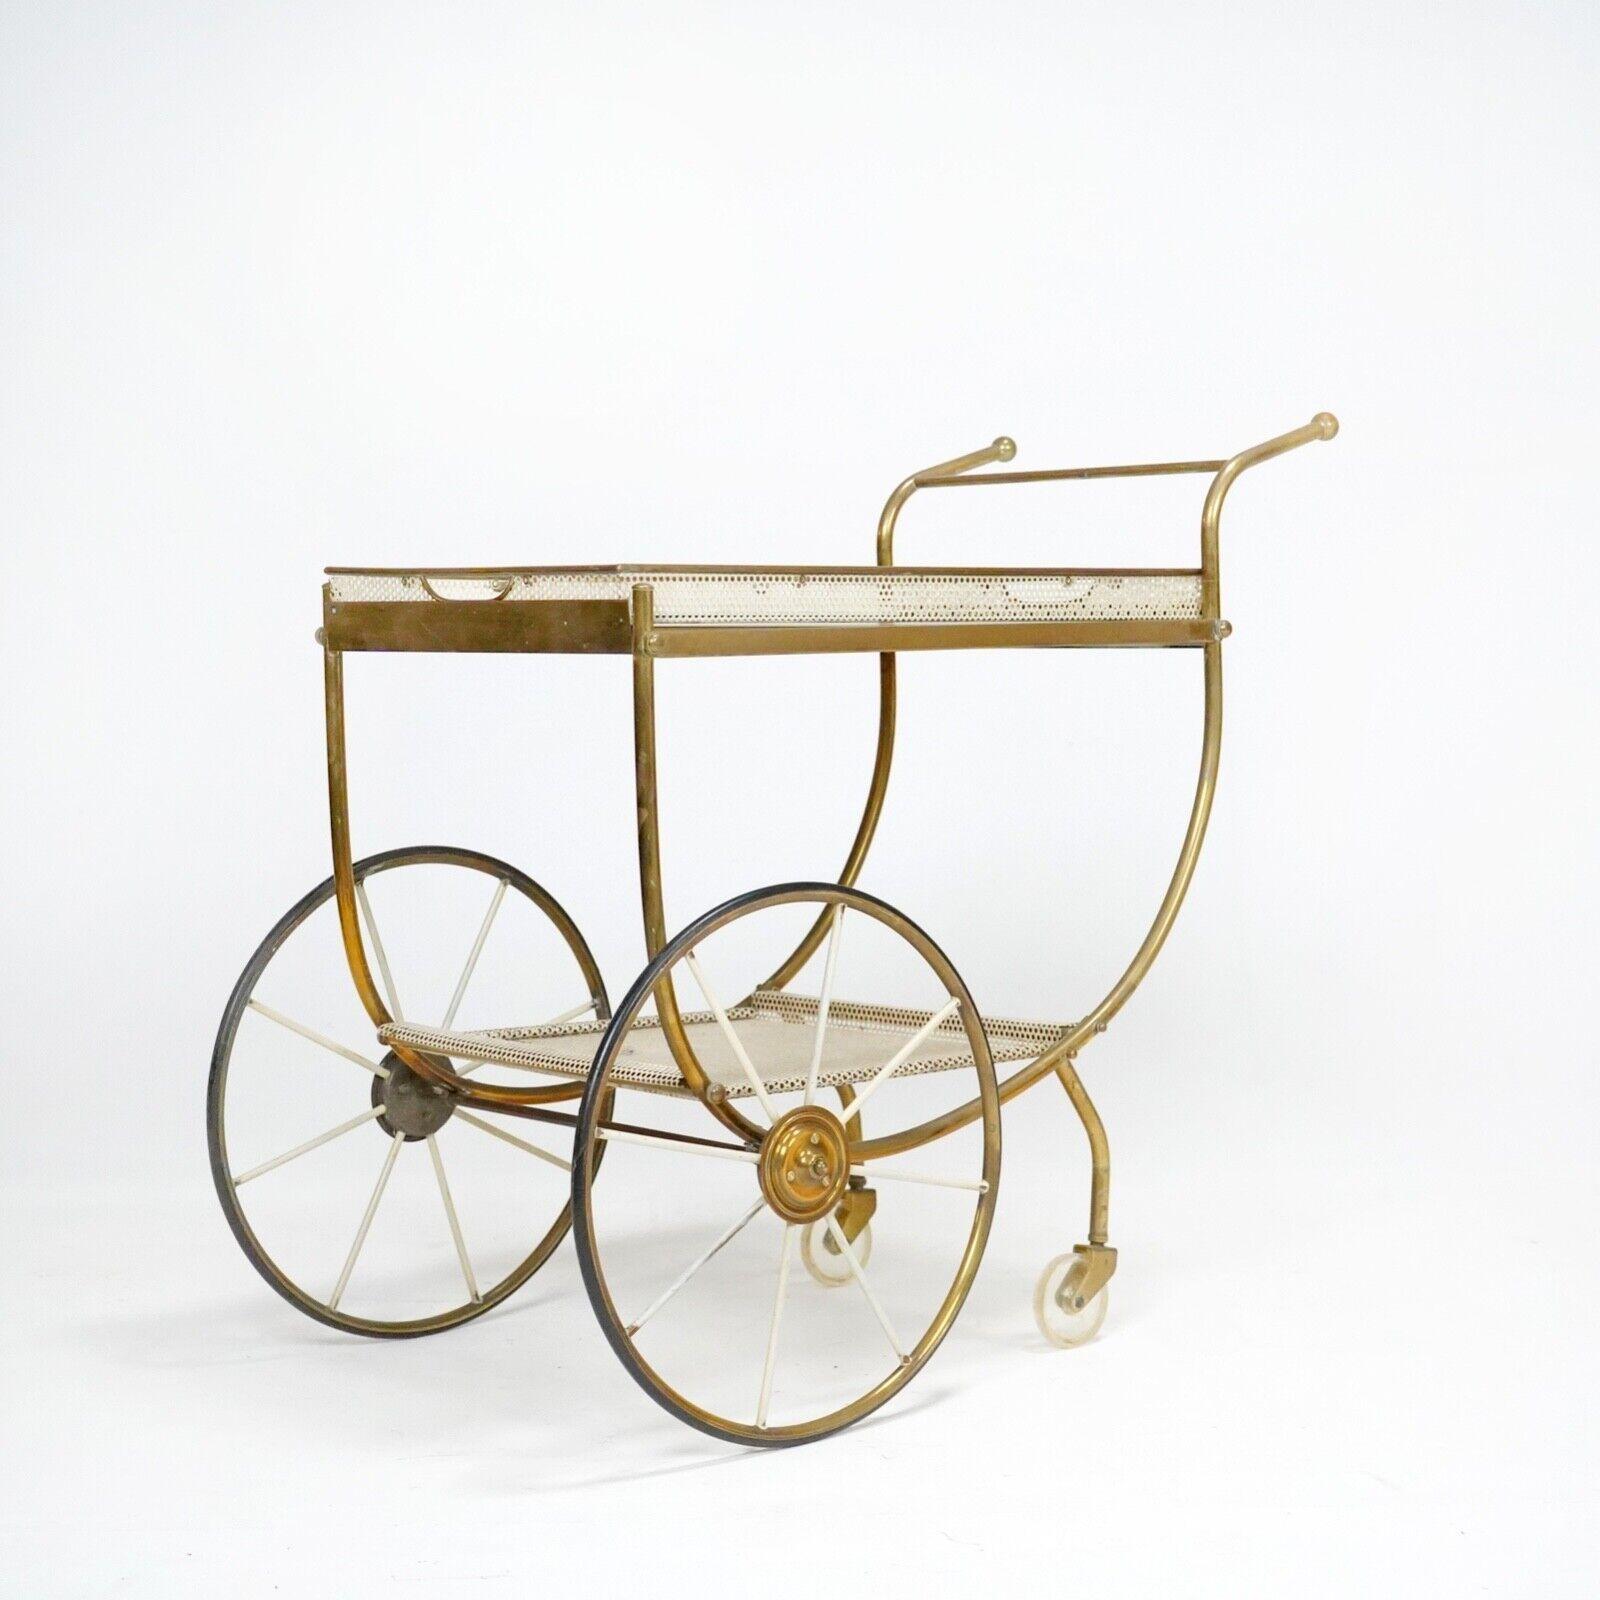 Serving trolley by Josef Frank for Svenskt Tenn, circa 1950.
Brass frame with perforated sheet metal shelf and removable tray. 
Wheels run smoothly.
 
Dimensions

H 75cm (handles) 63cm (top of tray)
W 43cm 
L 88cm (handle to wheel)
 
Condition